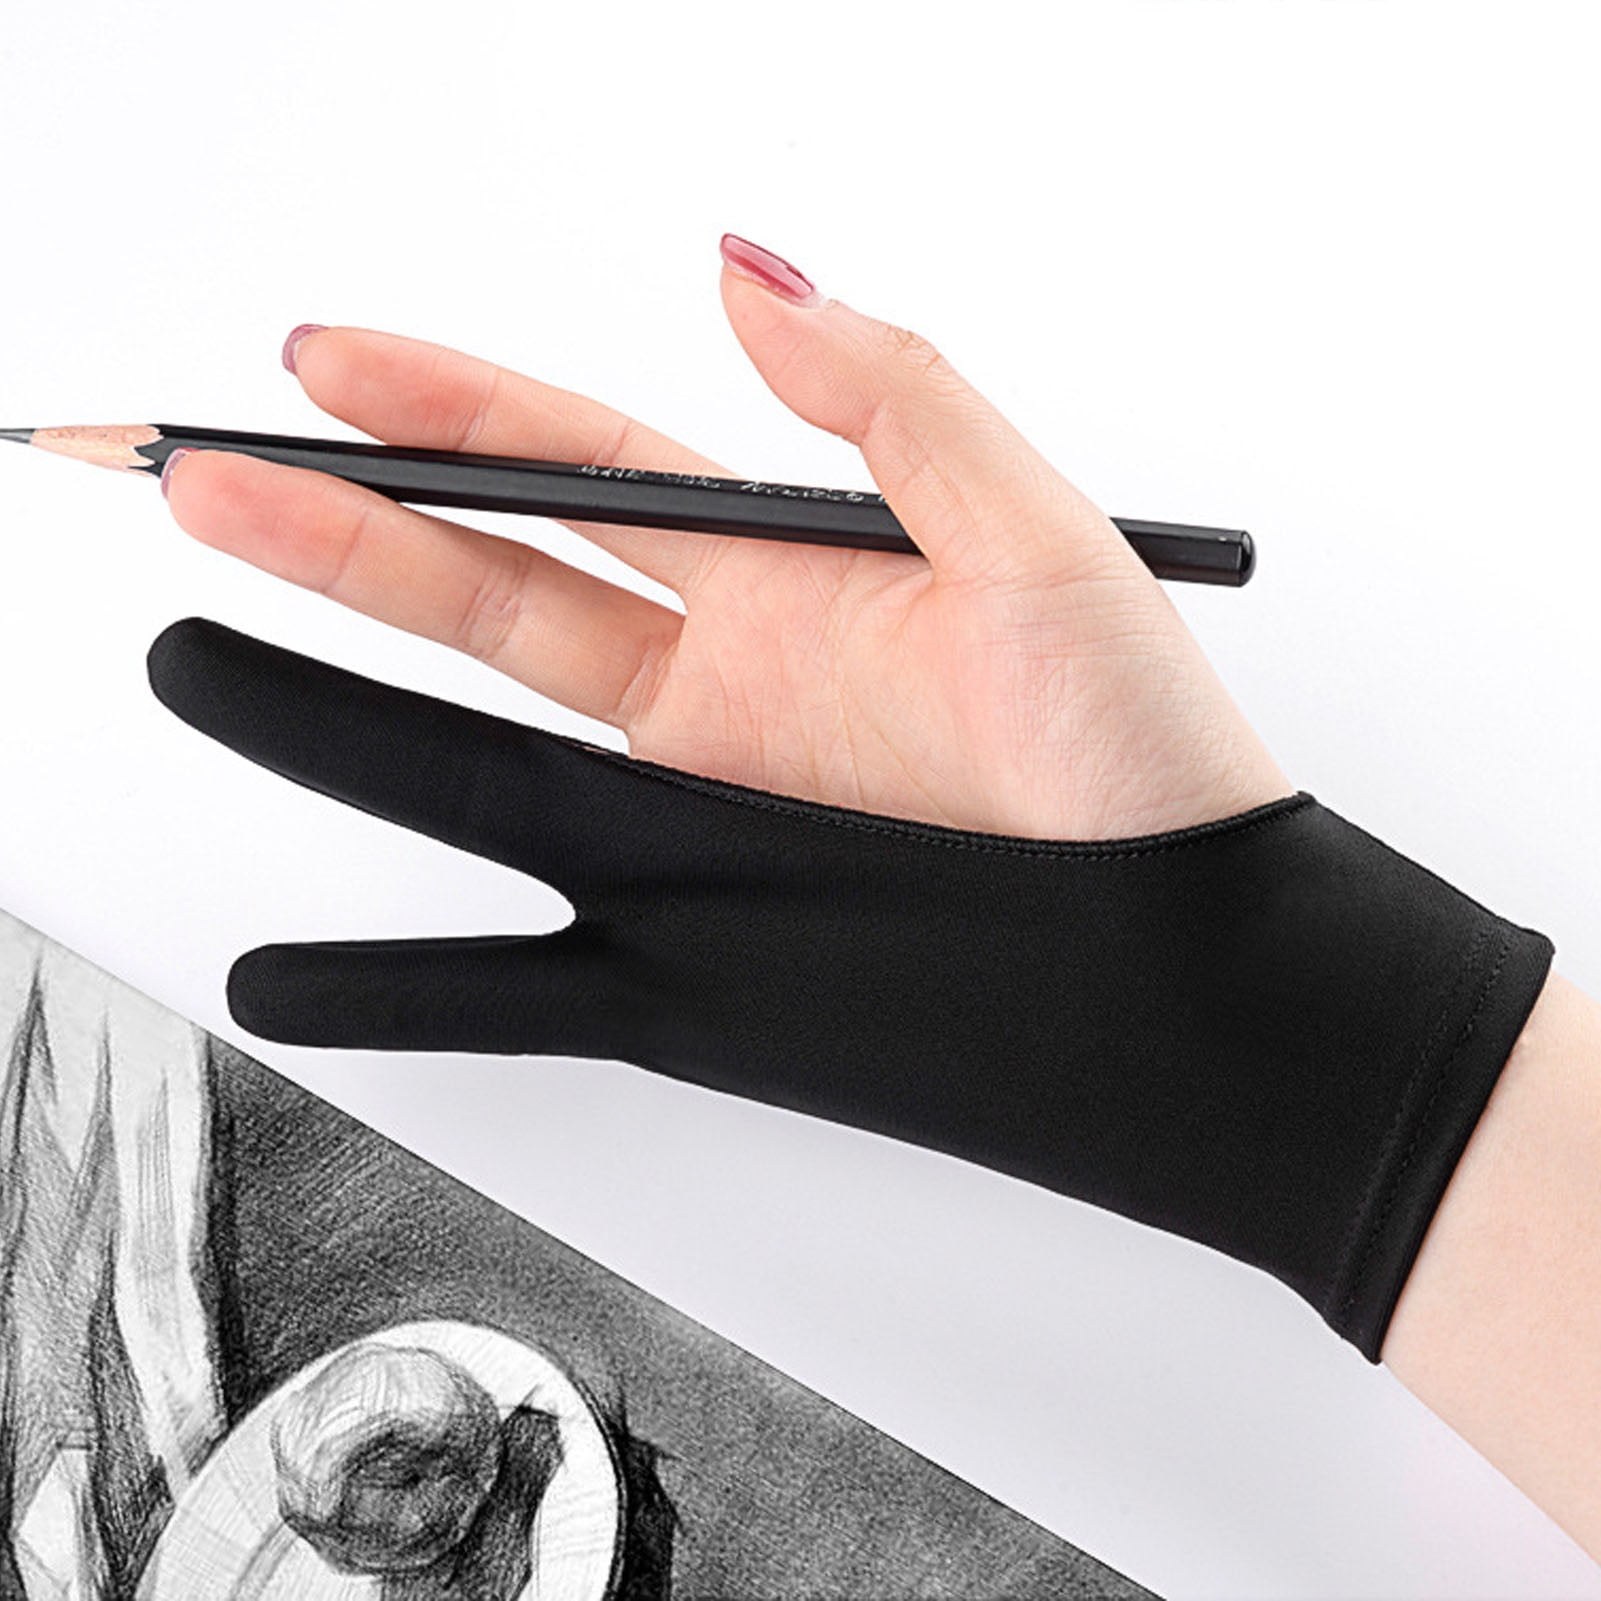 D-GROEE 1Pc Artists Gloves - Palm Rejection Gloves with Two Fingers for  Paper Sketching, iPad, Graphics Drawing Tablet, Suitable for Left and Right  Hand 